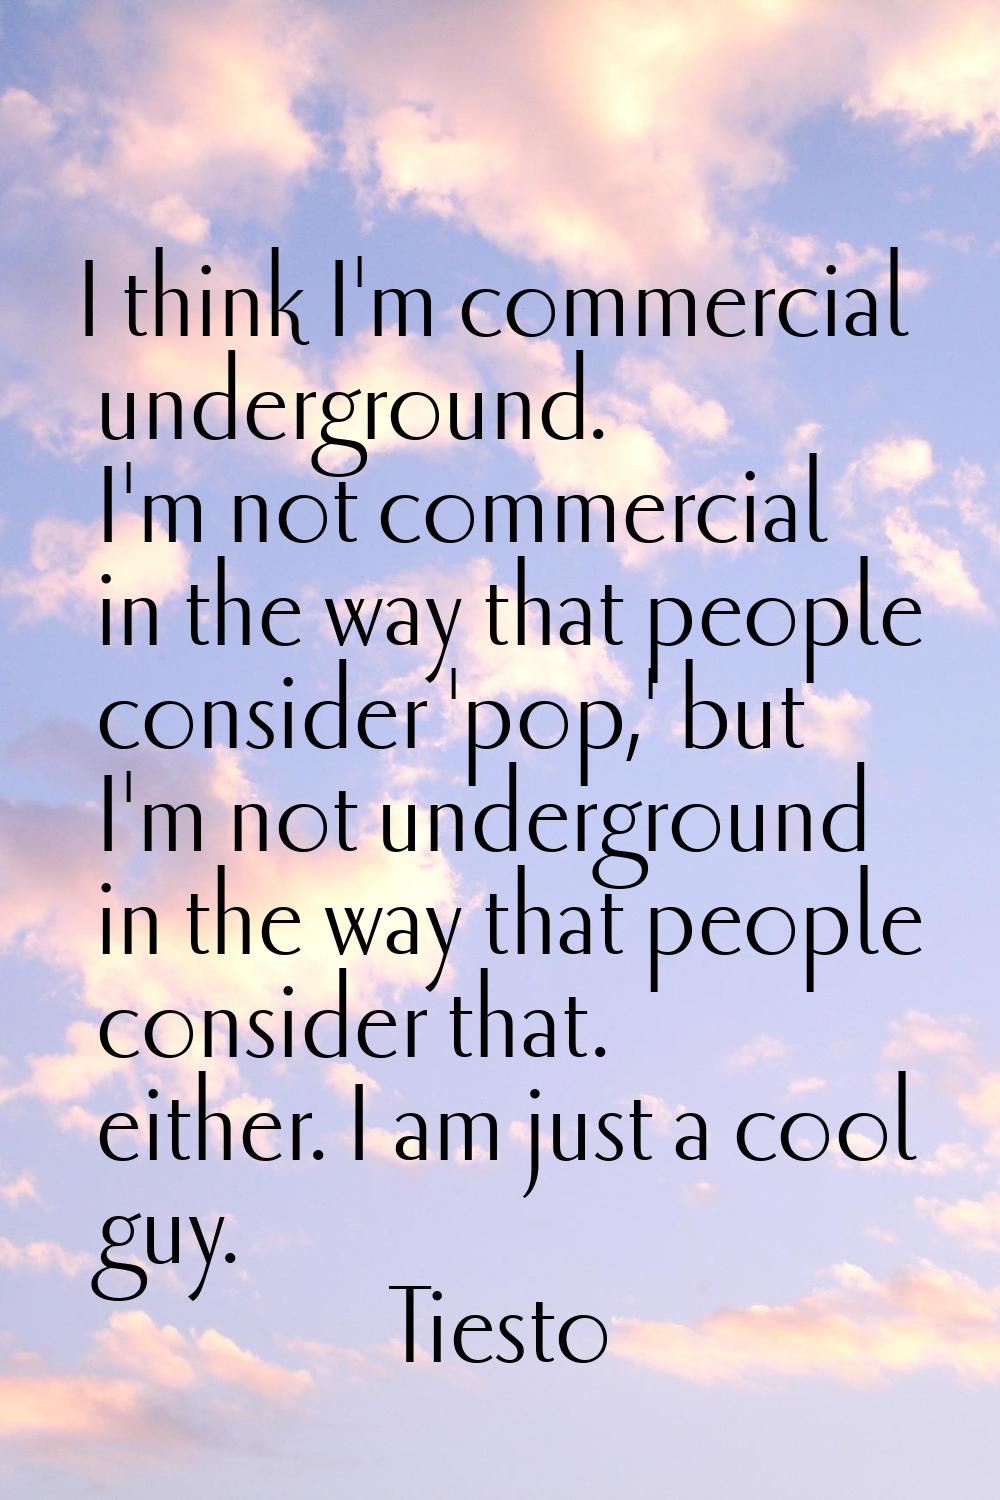 I think I'm commercial underground. I'm not commercial in the way that people consider 'pop,' but I